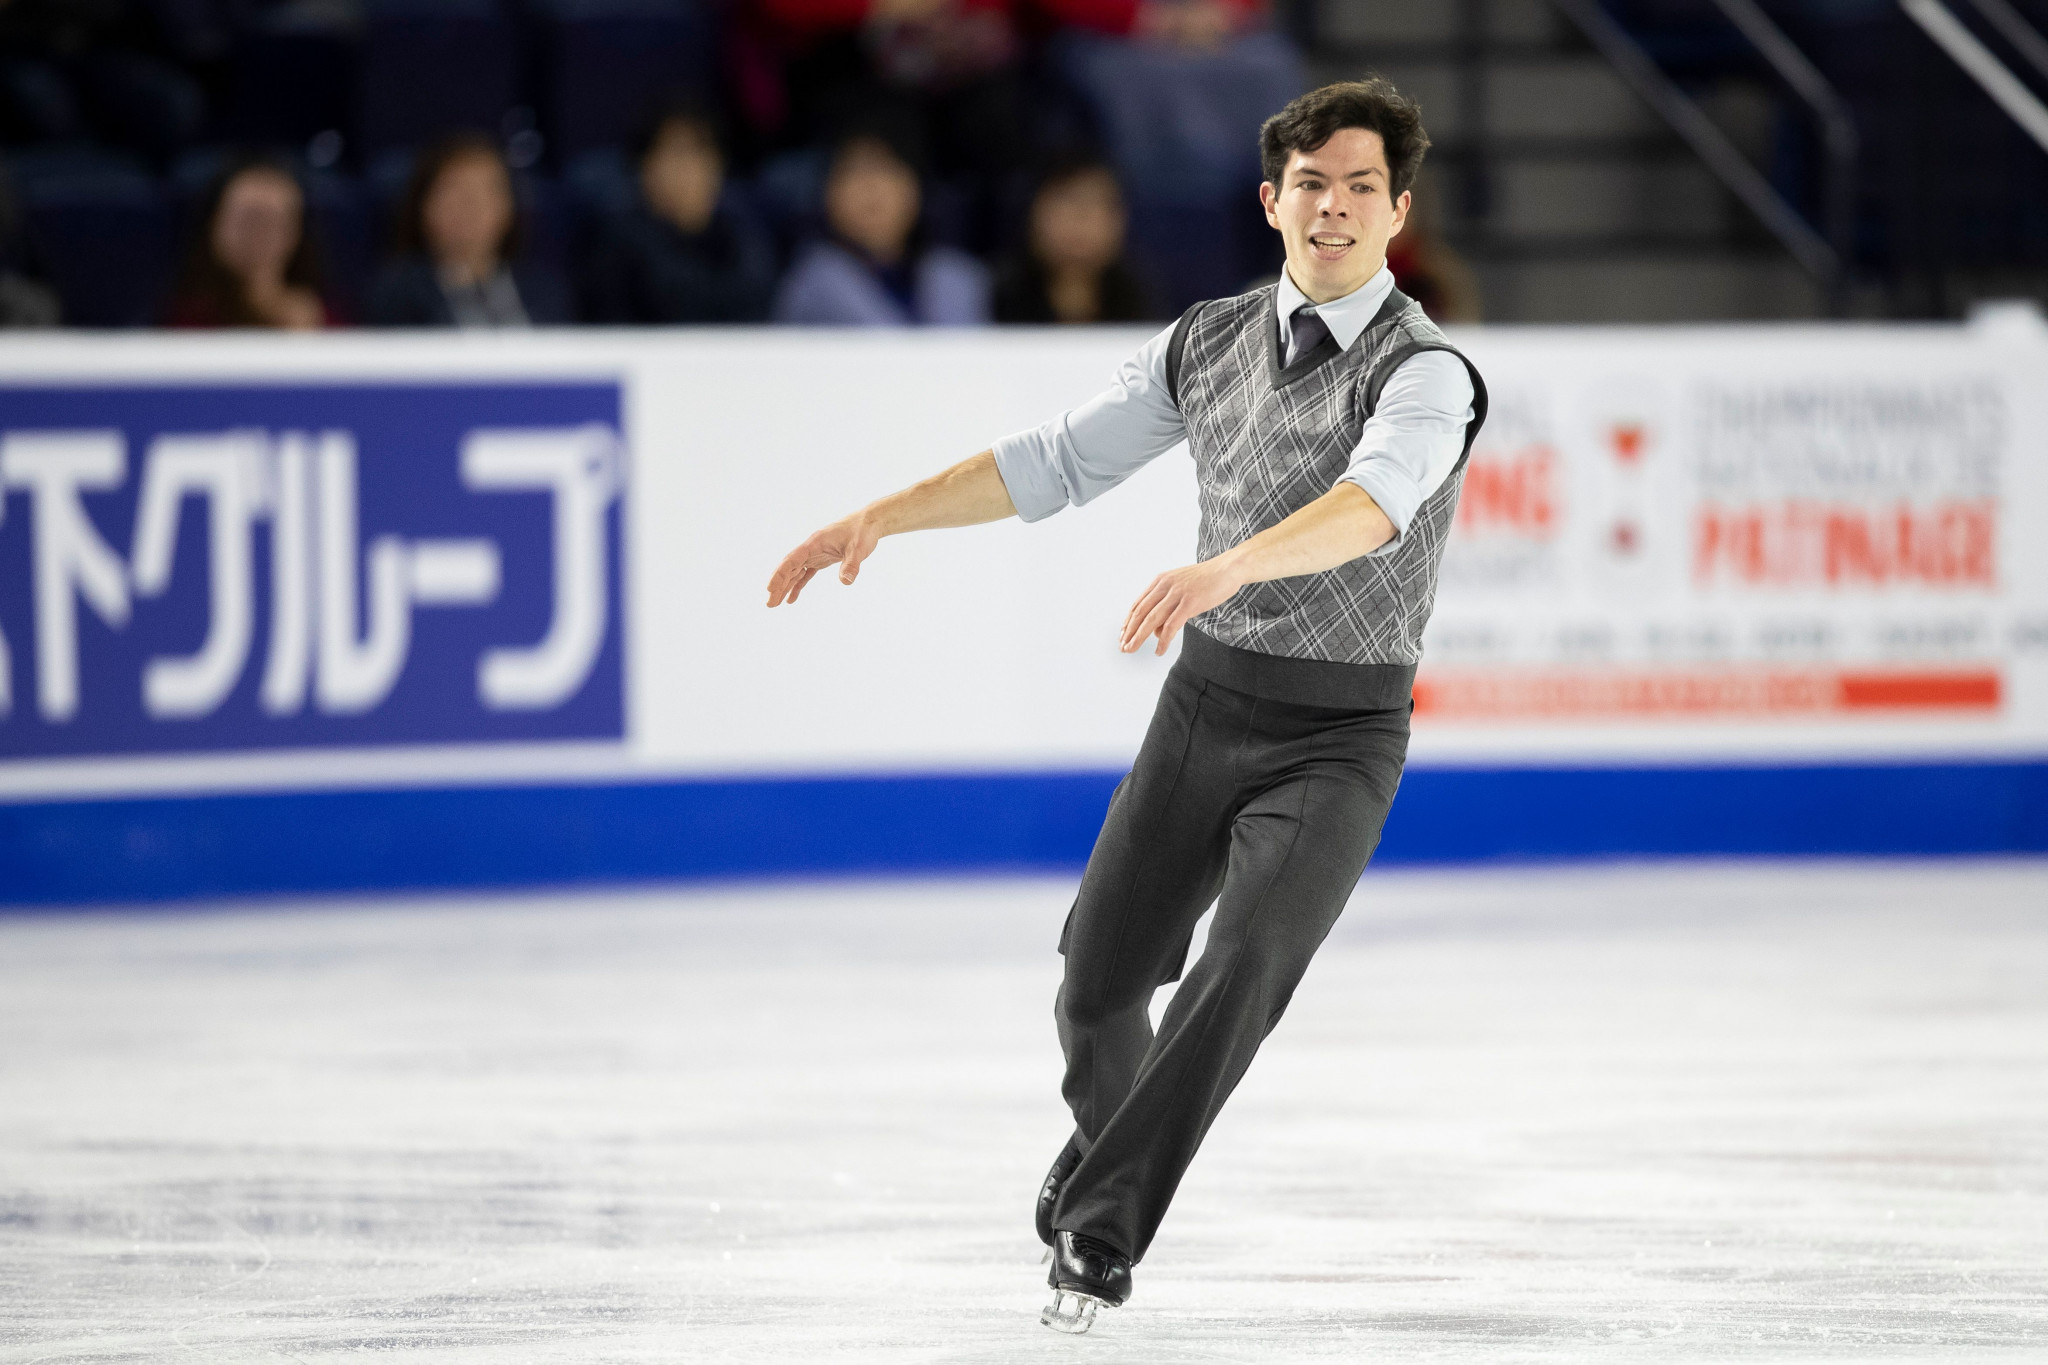 Home favourite Messing tops men's short programme standings on opening day of Skate Canada